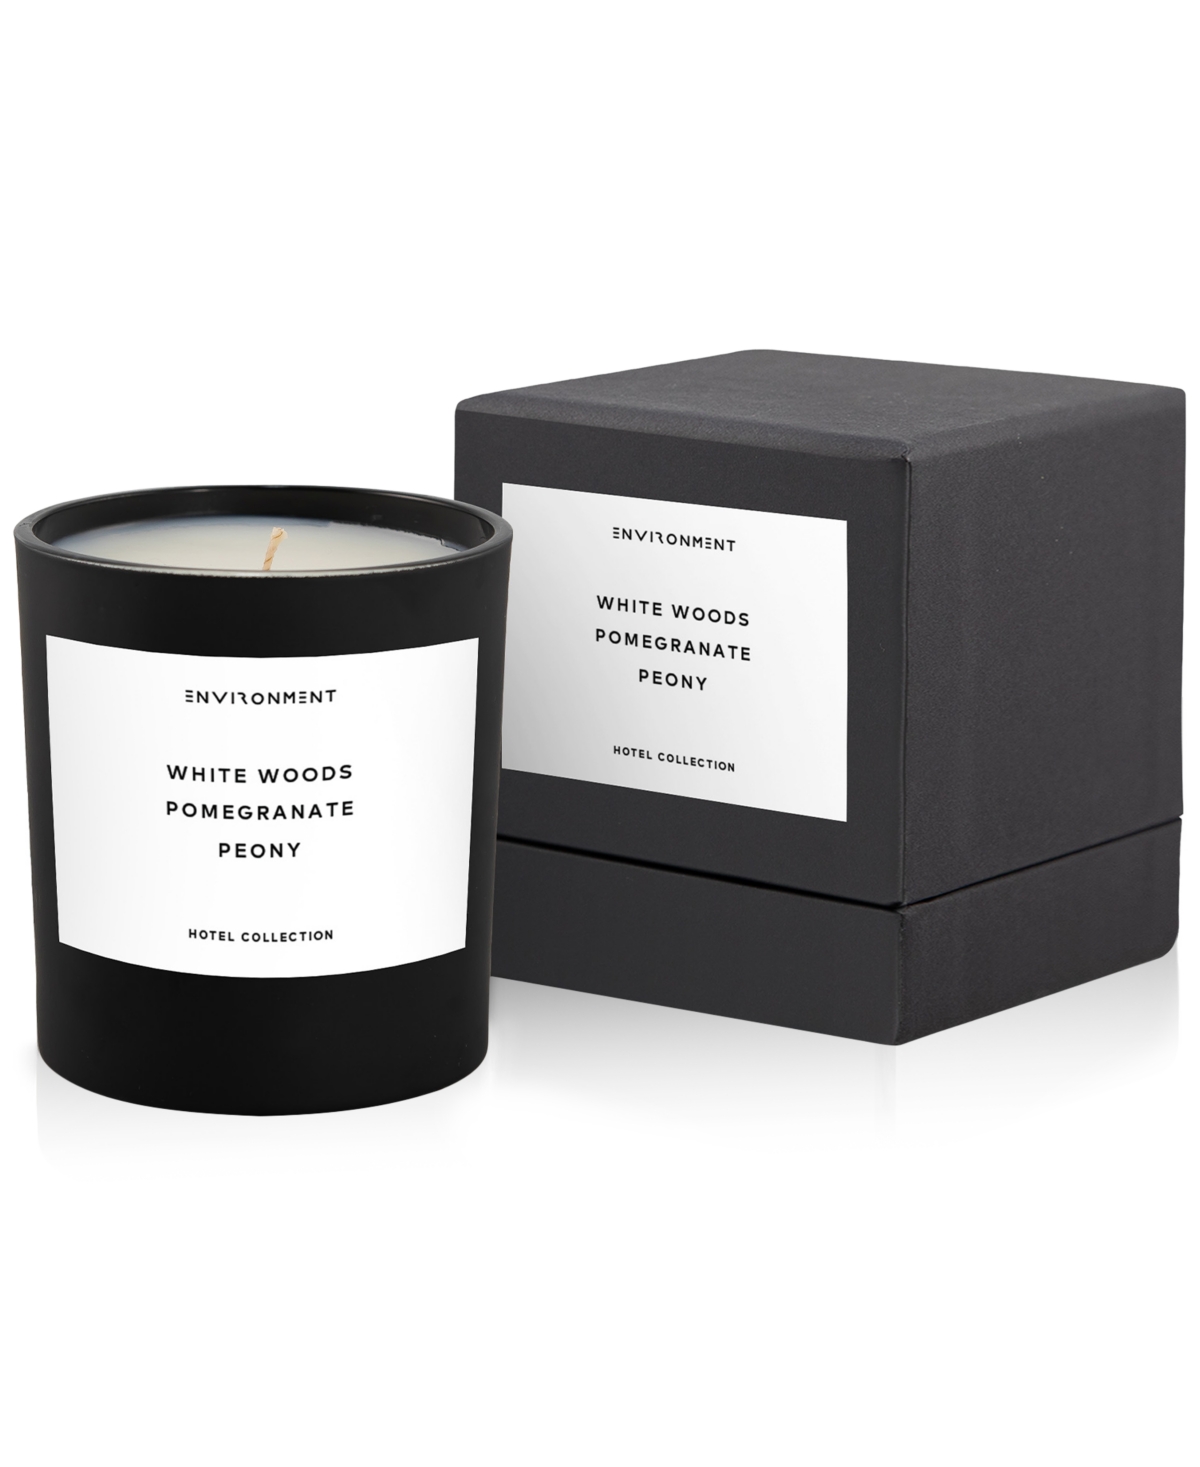 White Woods, Pomegranate & Peony Candle (Inspired by 5-Star Hotels), 8 oz.